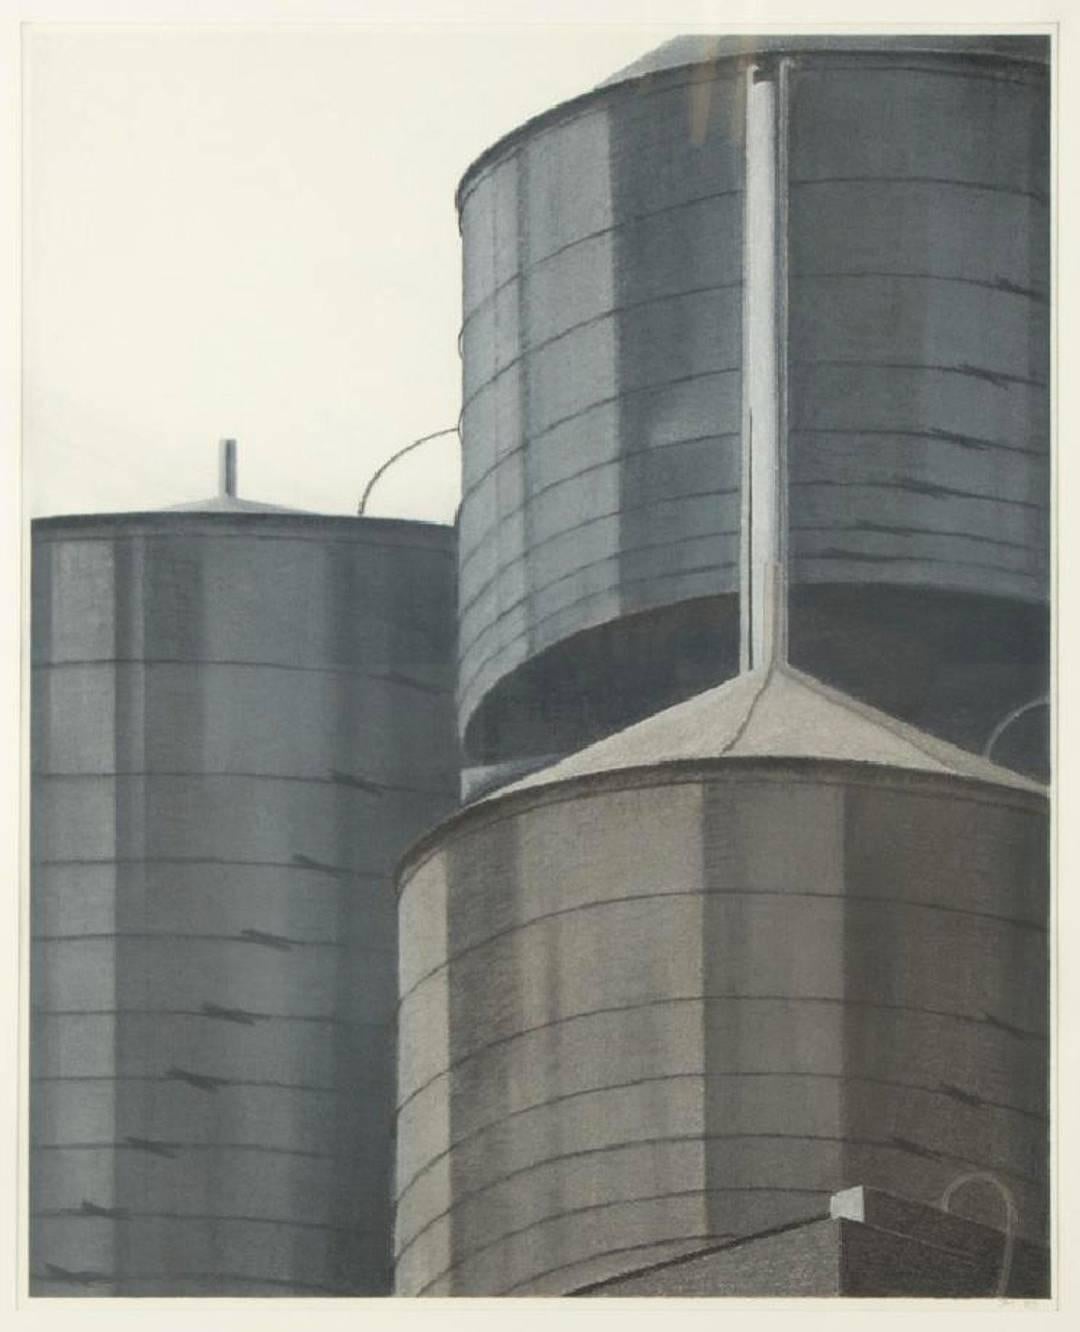 Jane McClintock Landscape Art - Water Towers from the NYC Reflections Series